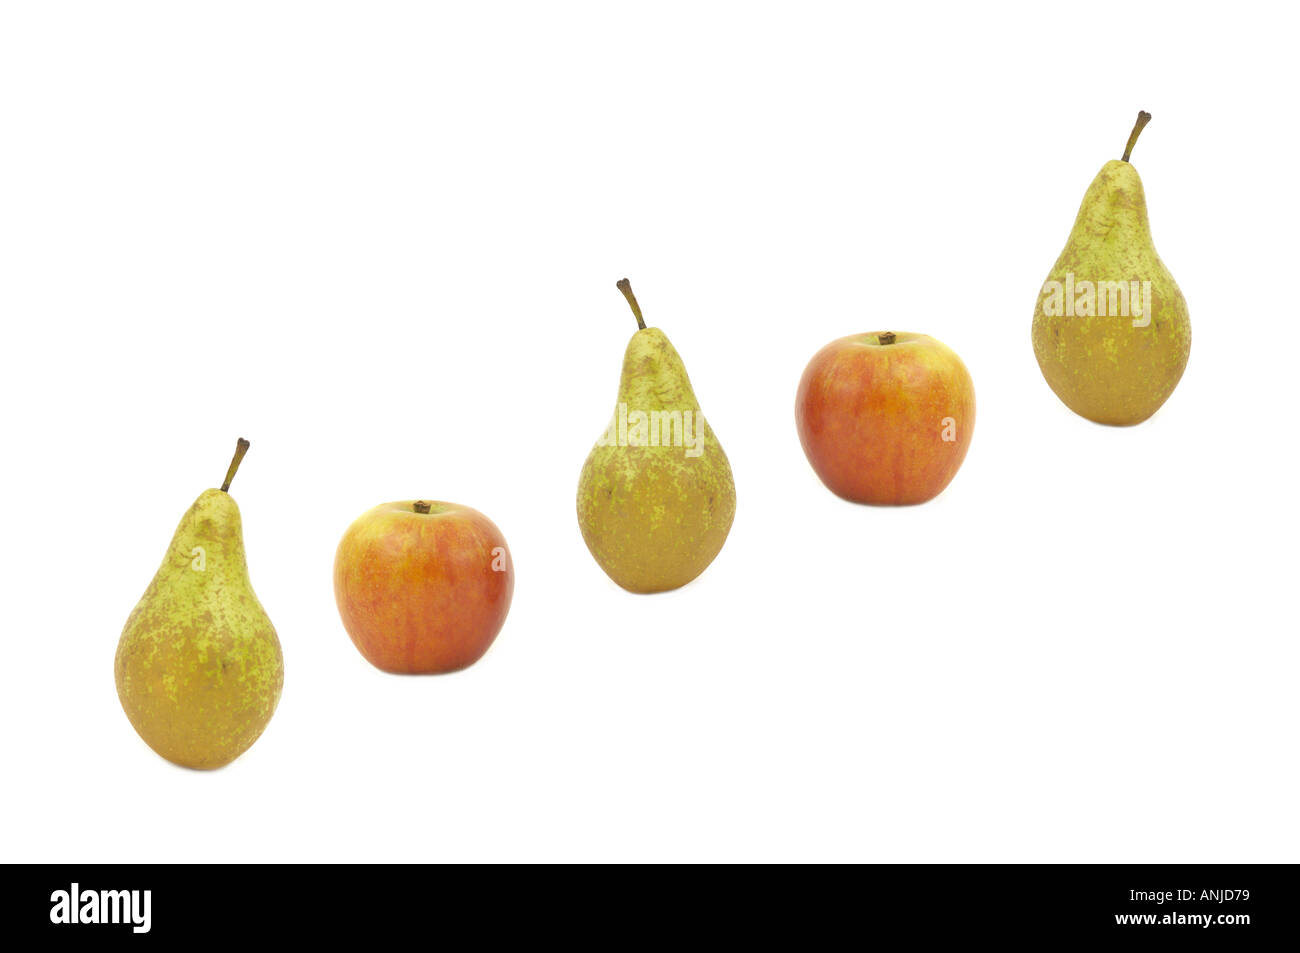 Cockney Rhyming Slang Apples and Pears Stairs Stock Photo